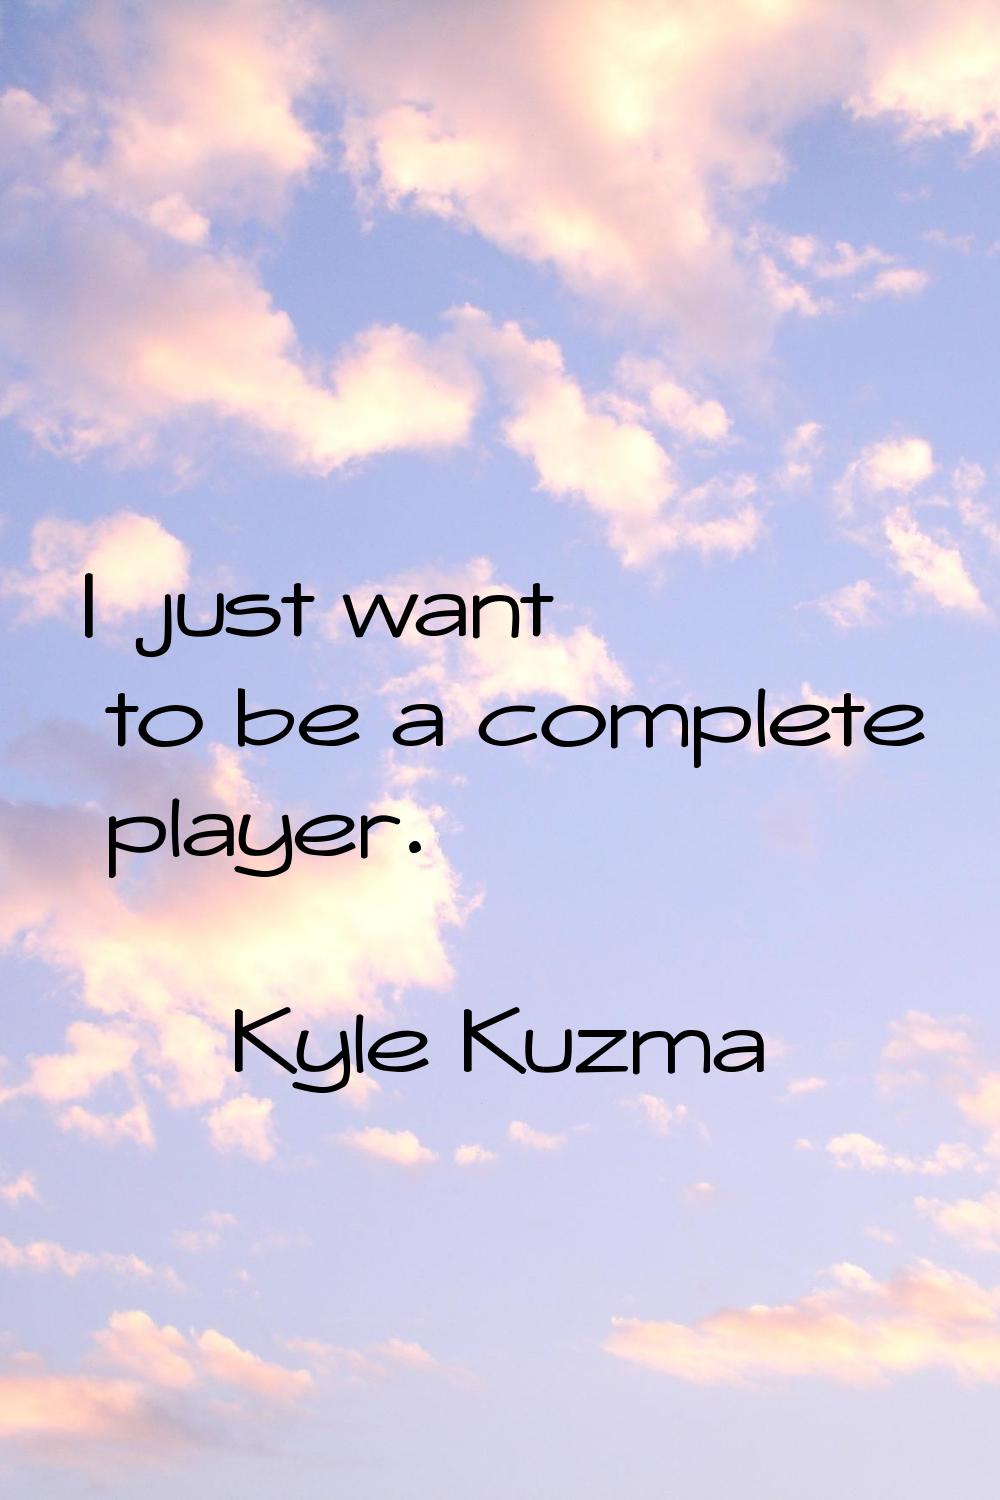 I just want to be a complete player.